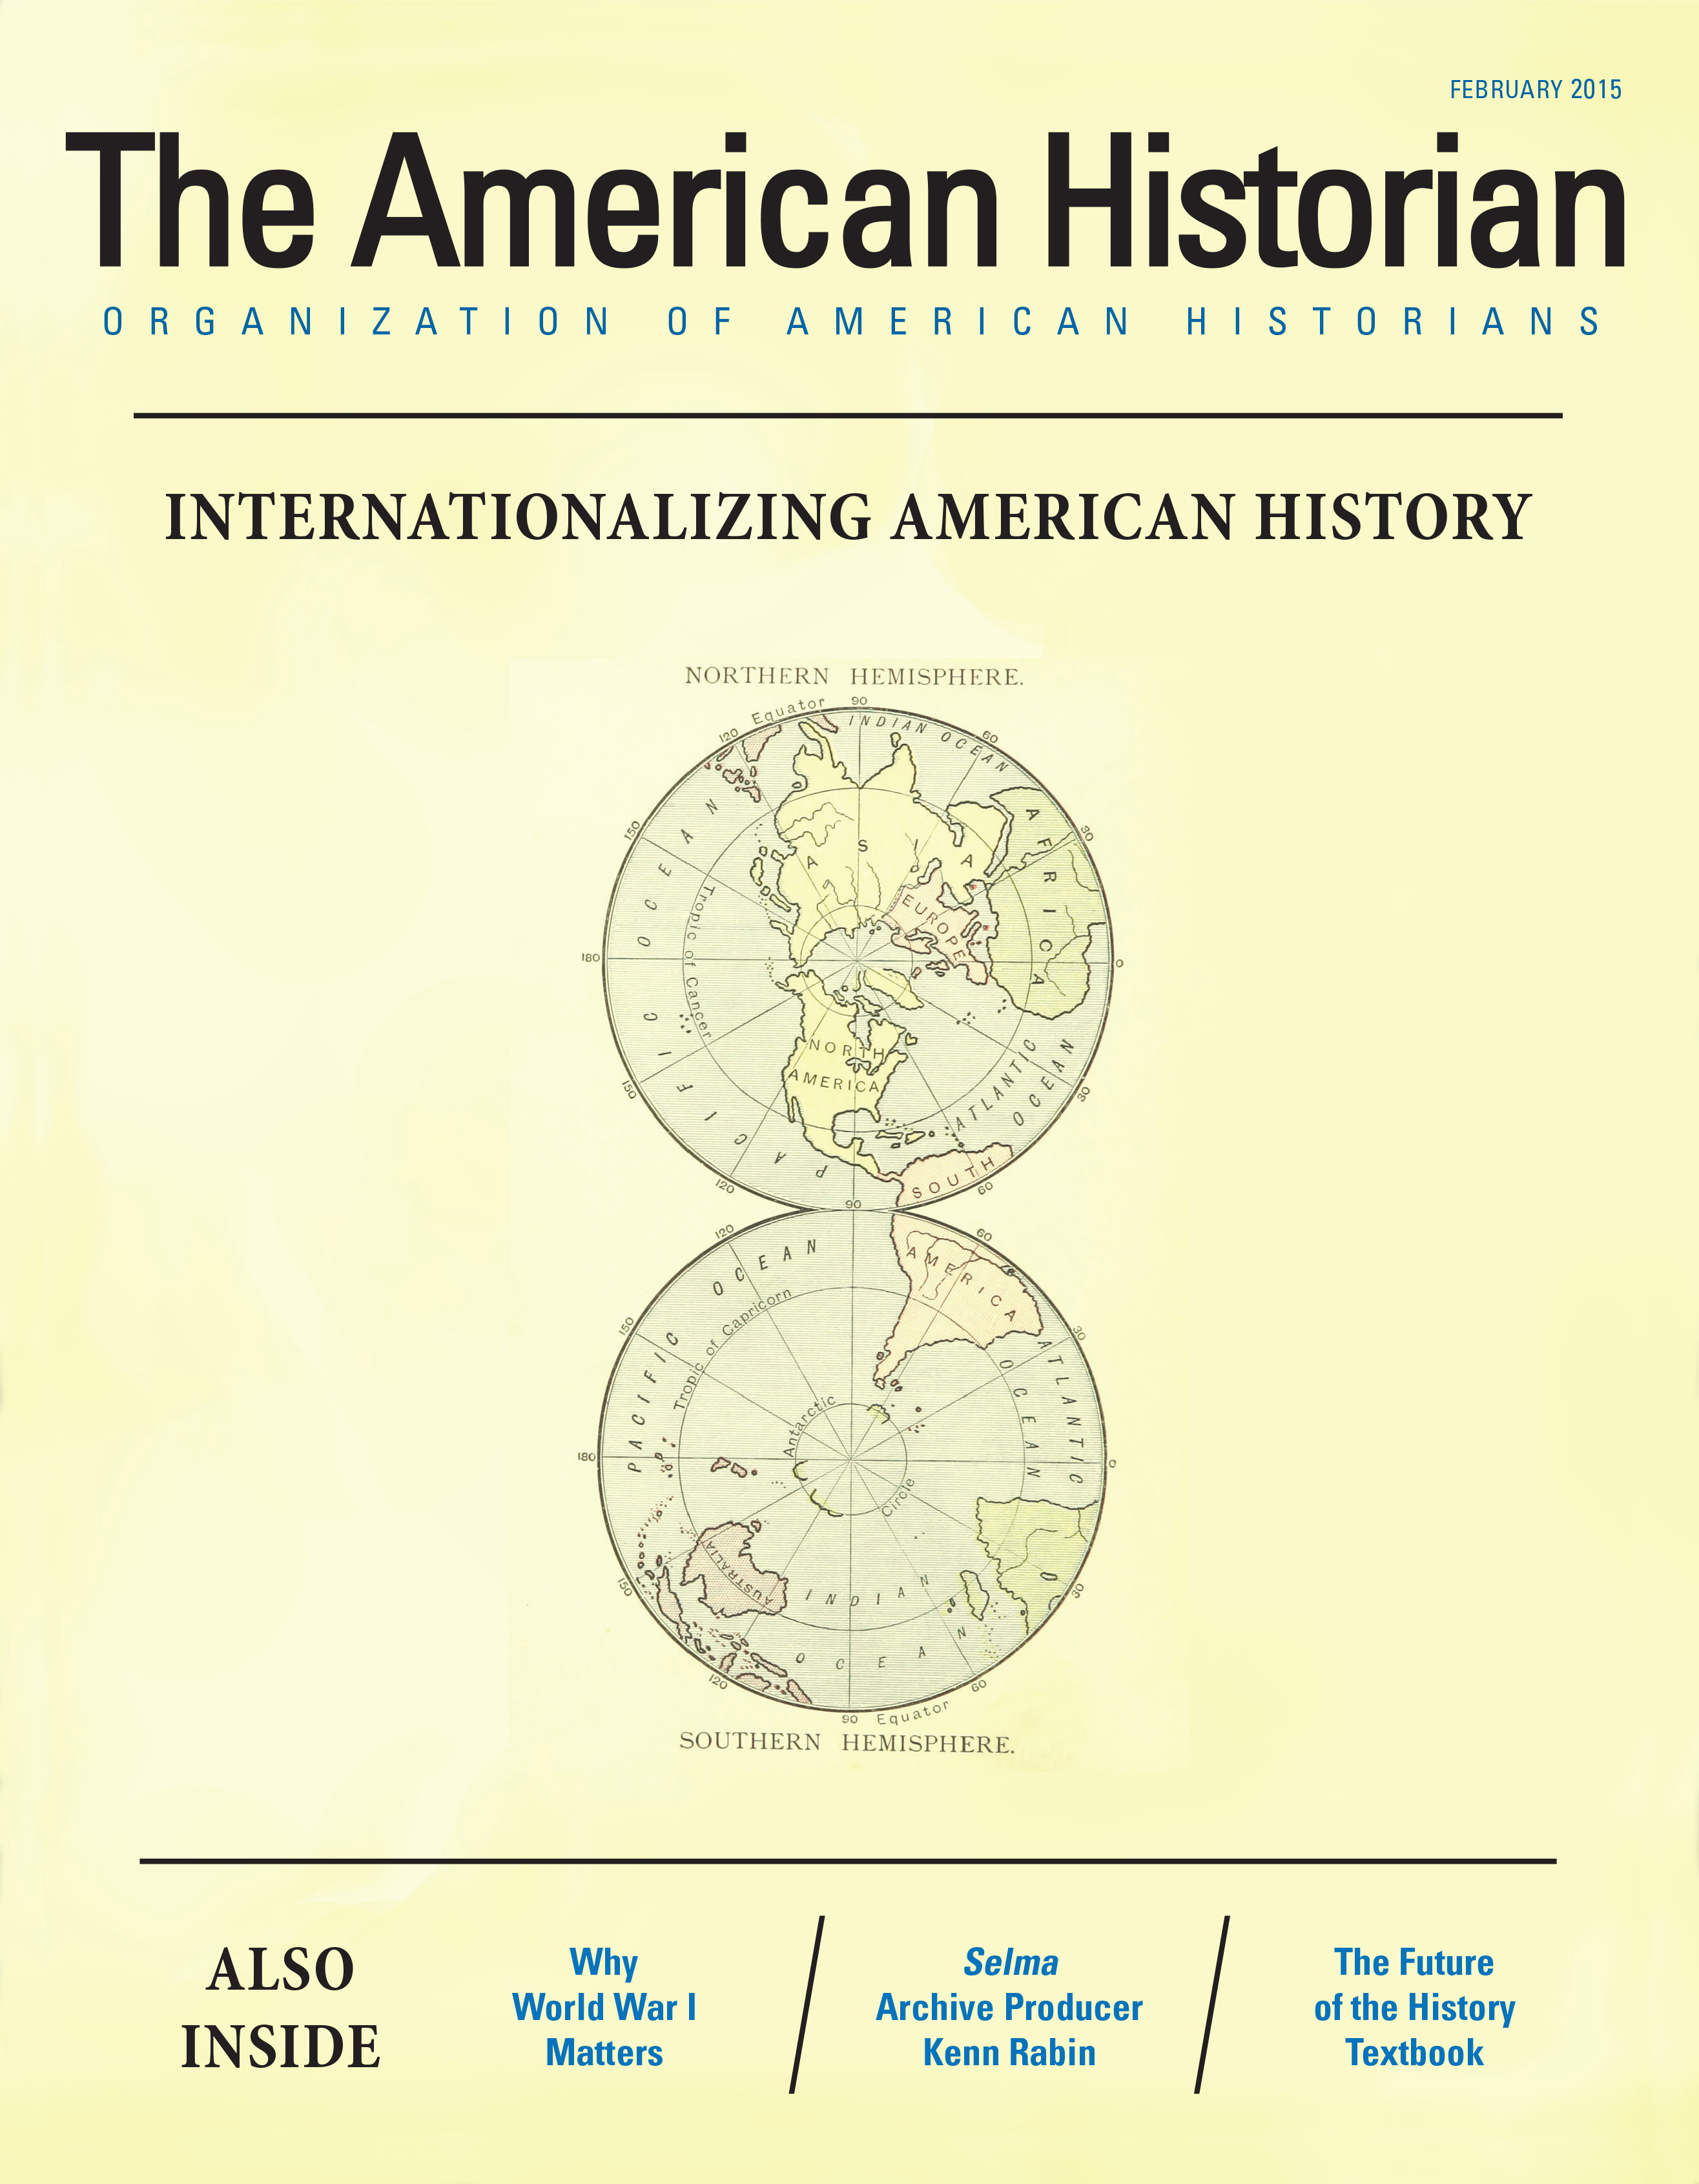 This issue's cover shows 2D globes against a yellow background and the title 